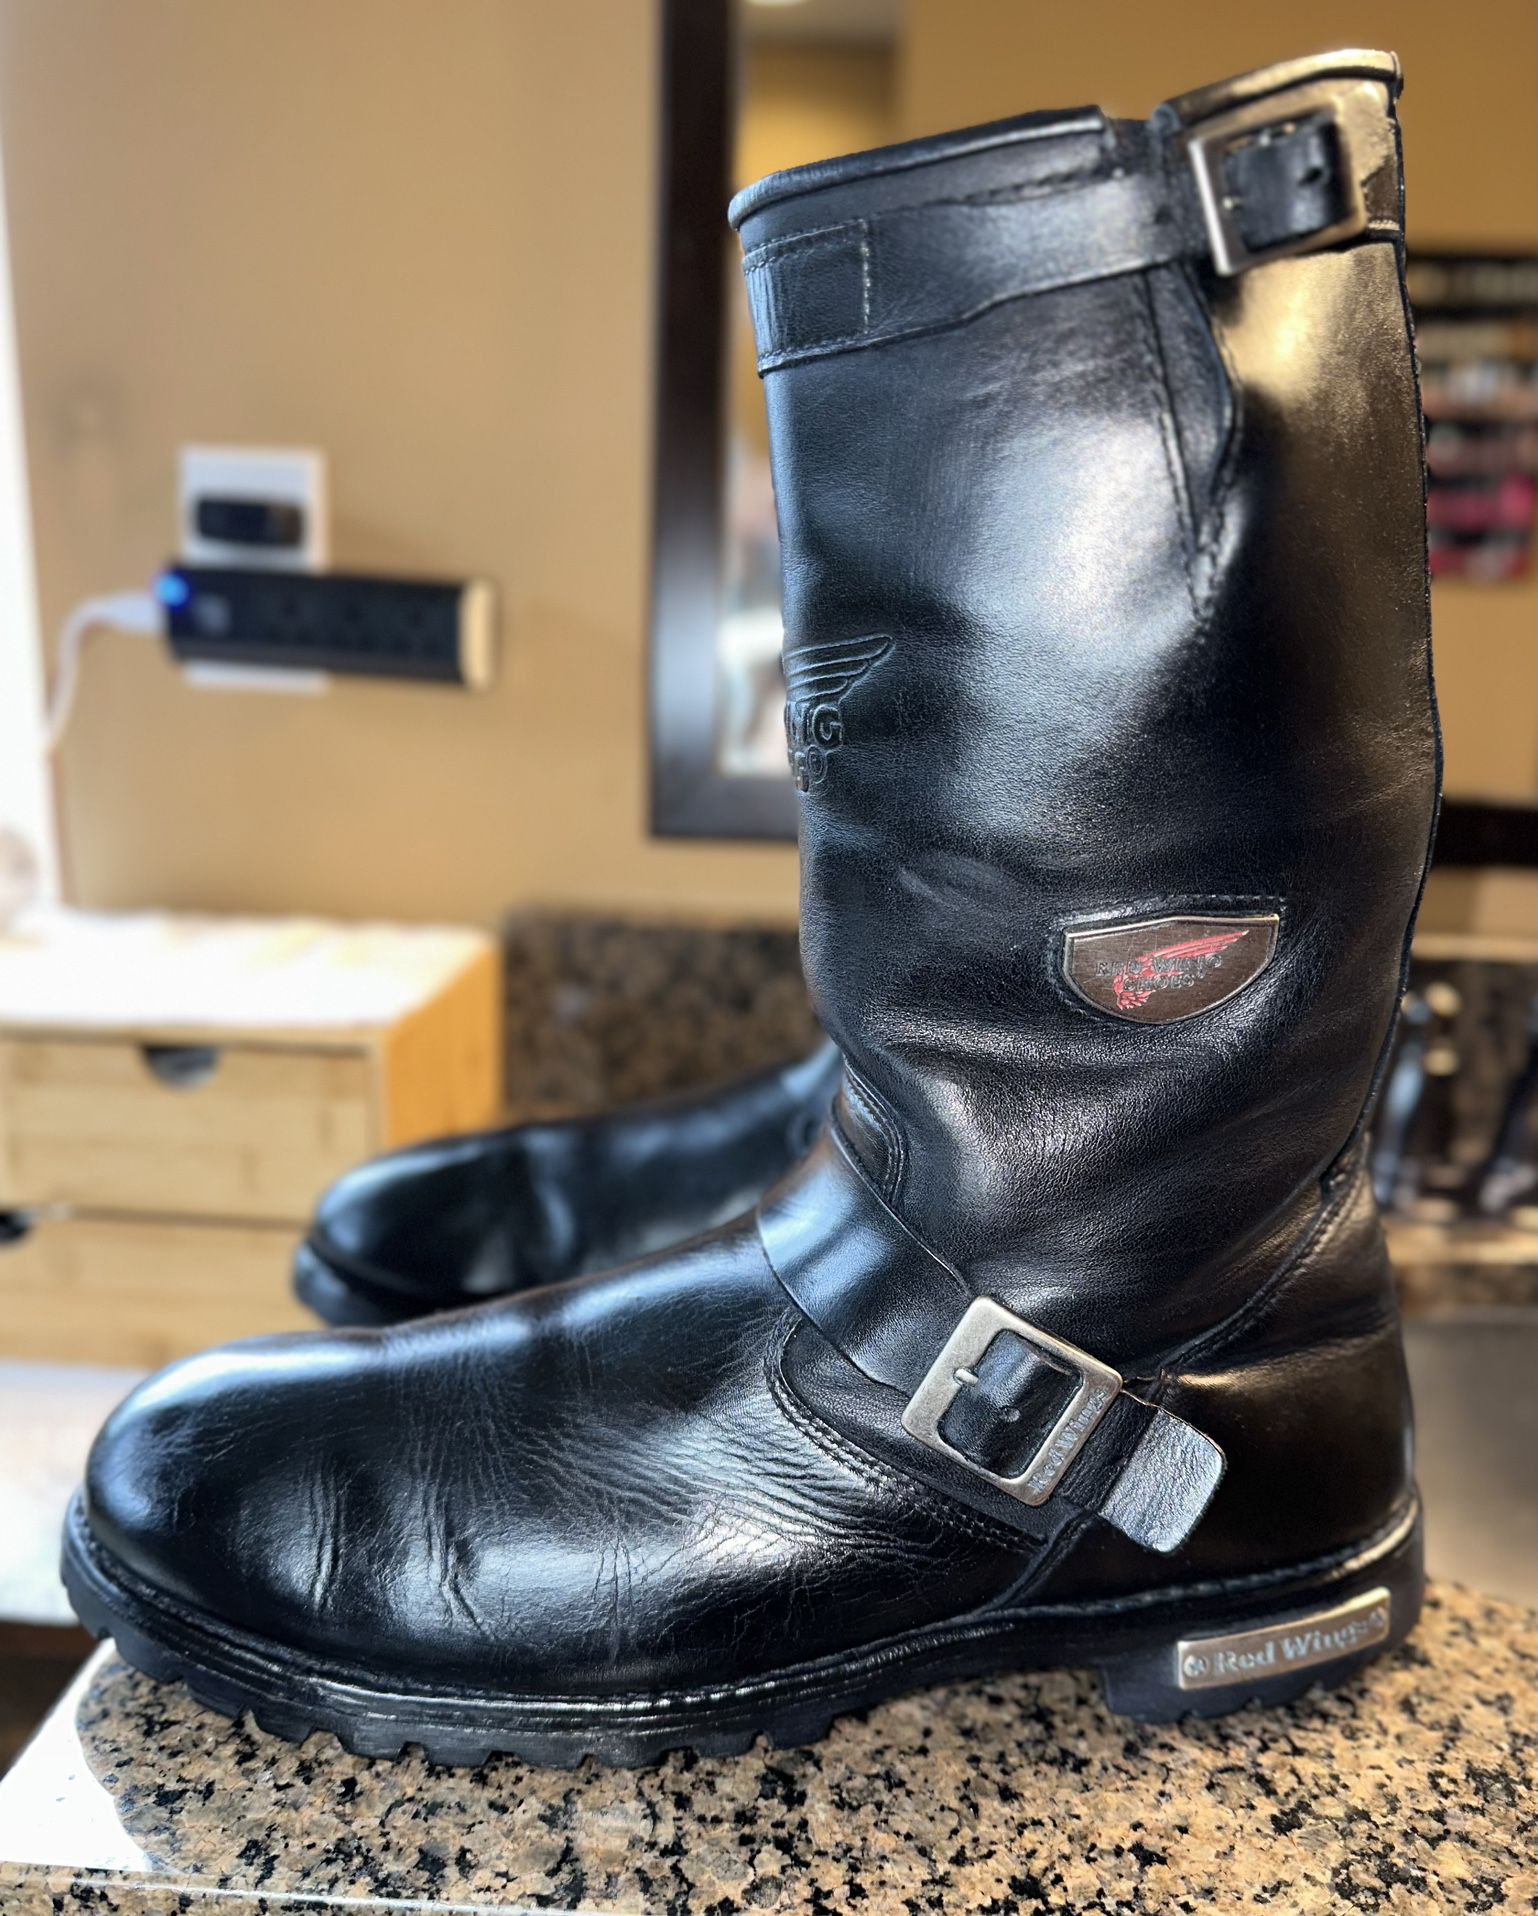 🔥Red Wing #988 Motorcycle Black Leather Boots (size 14)🔥